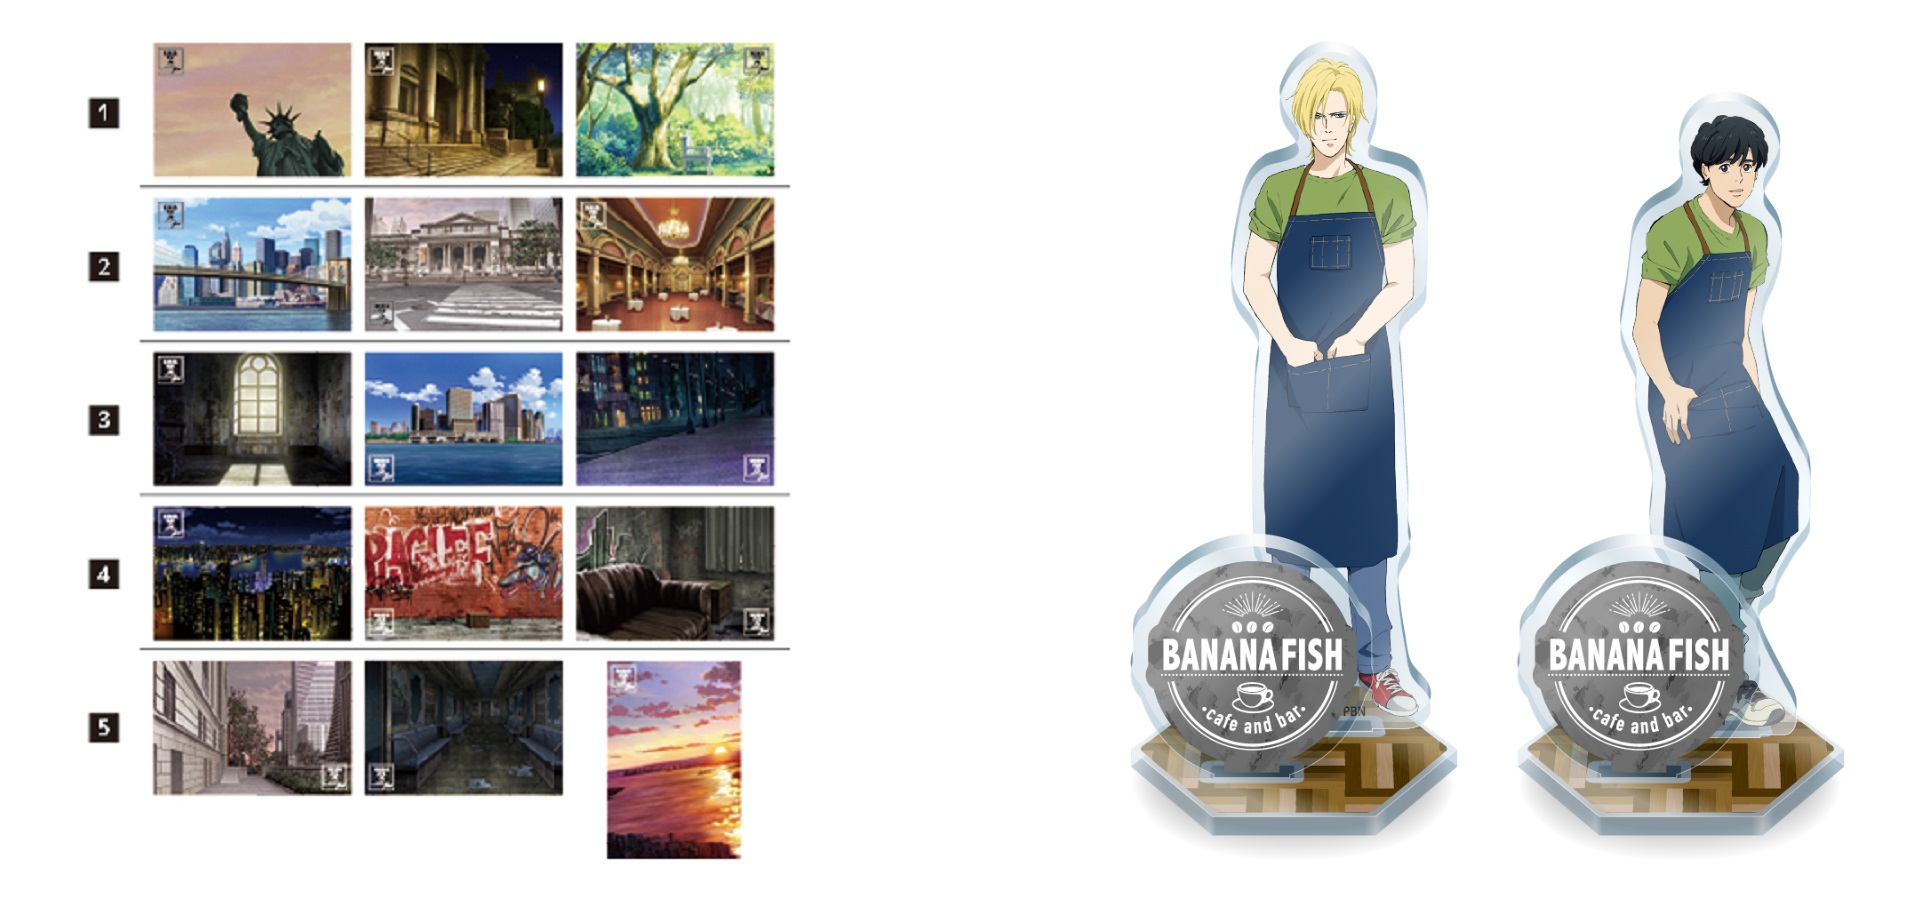 「BANANA FISH Cafe and Bar - Look back on! -」オリジナルグッズ